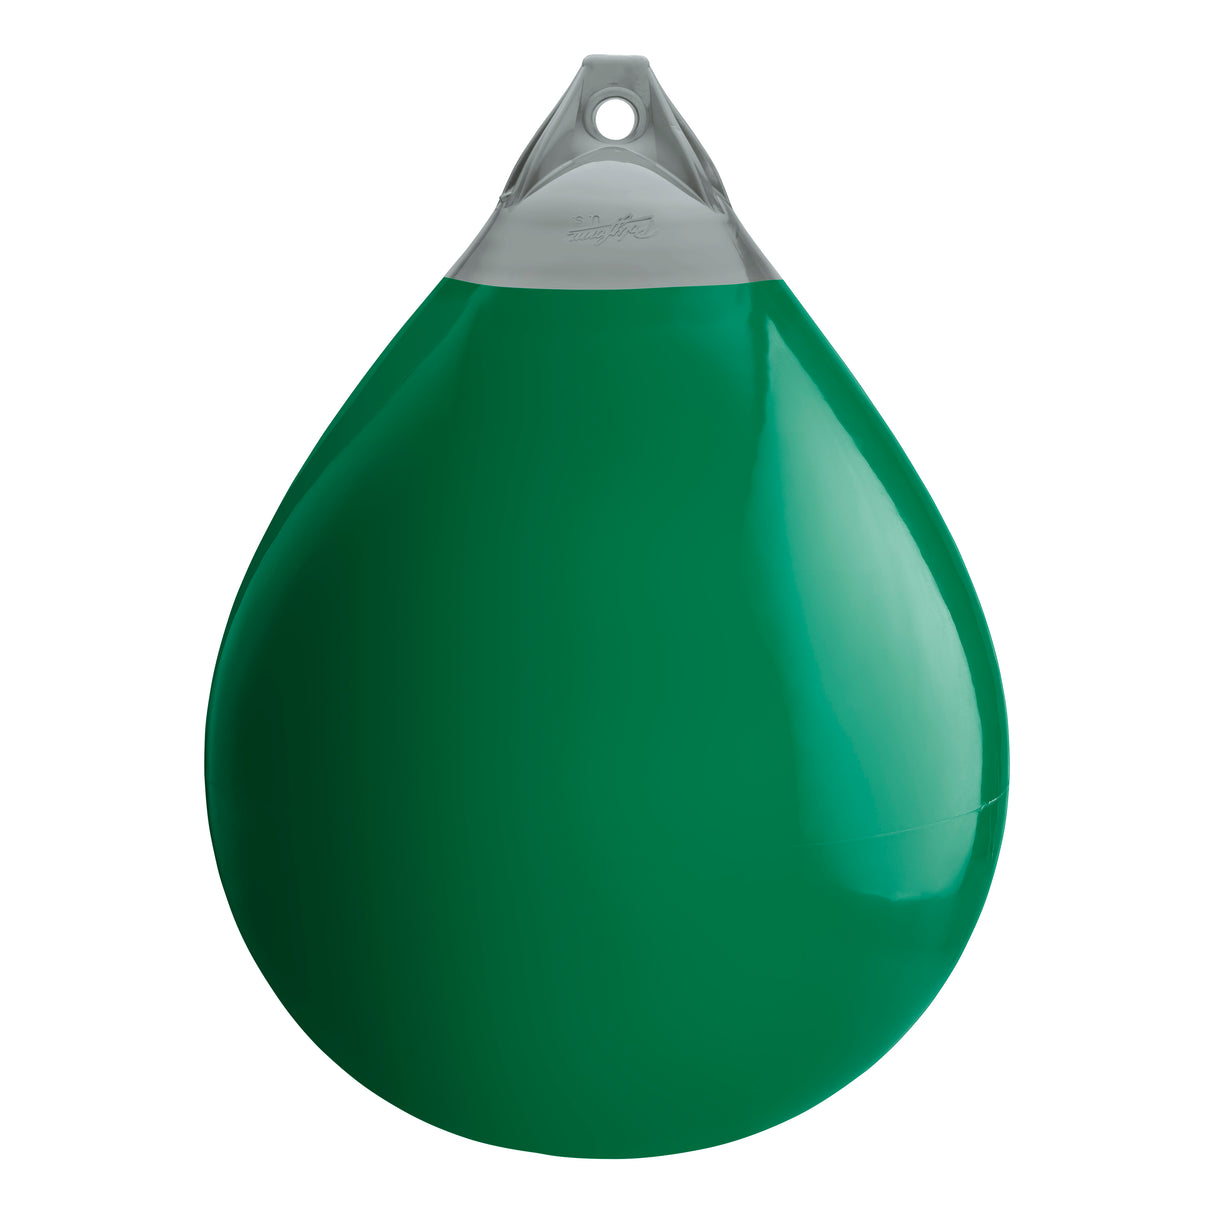 Forest Green buoy with Grey-Top, Polyform A-7